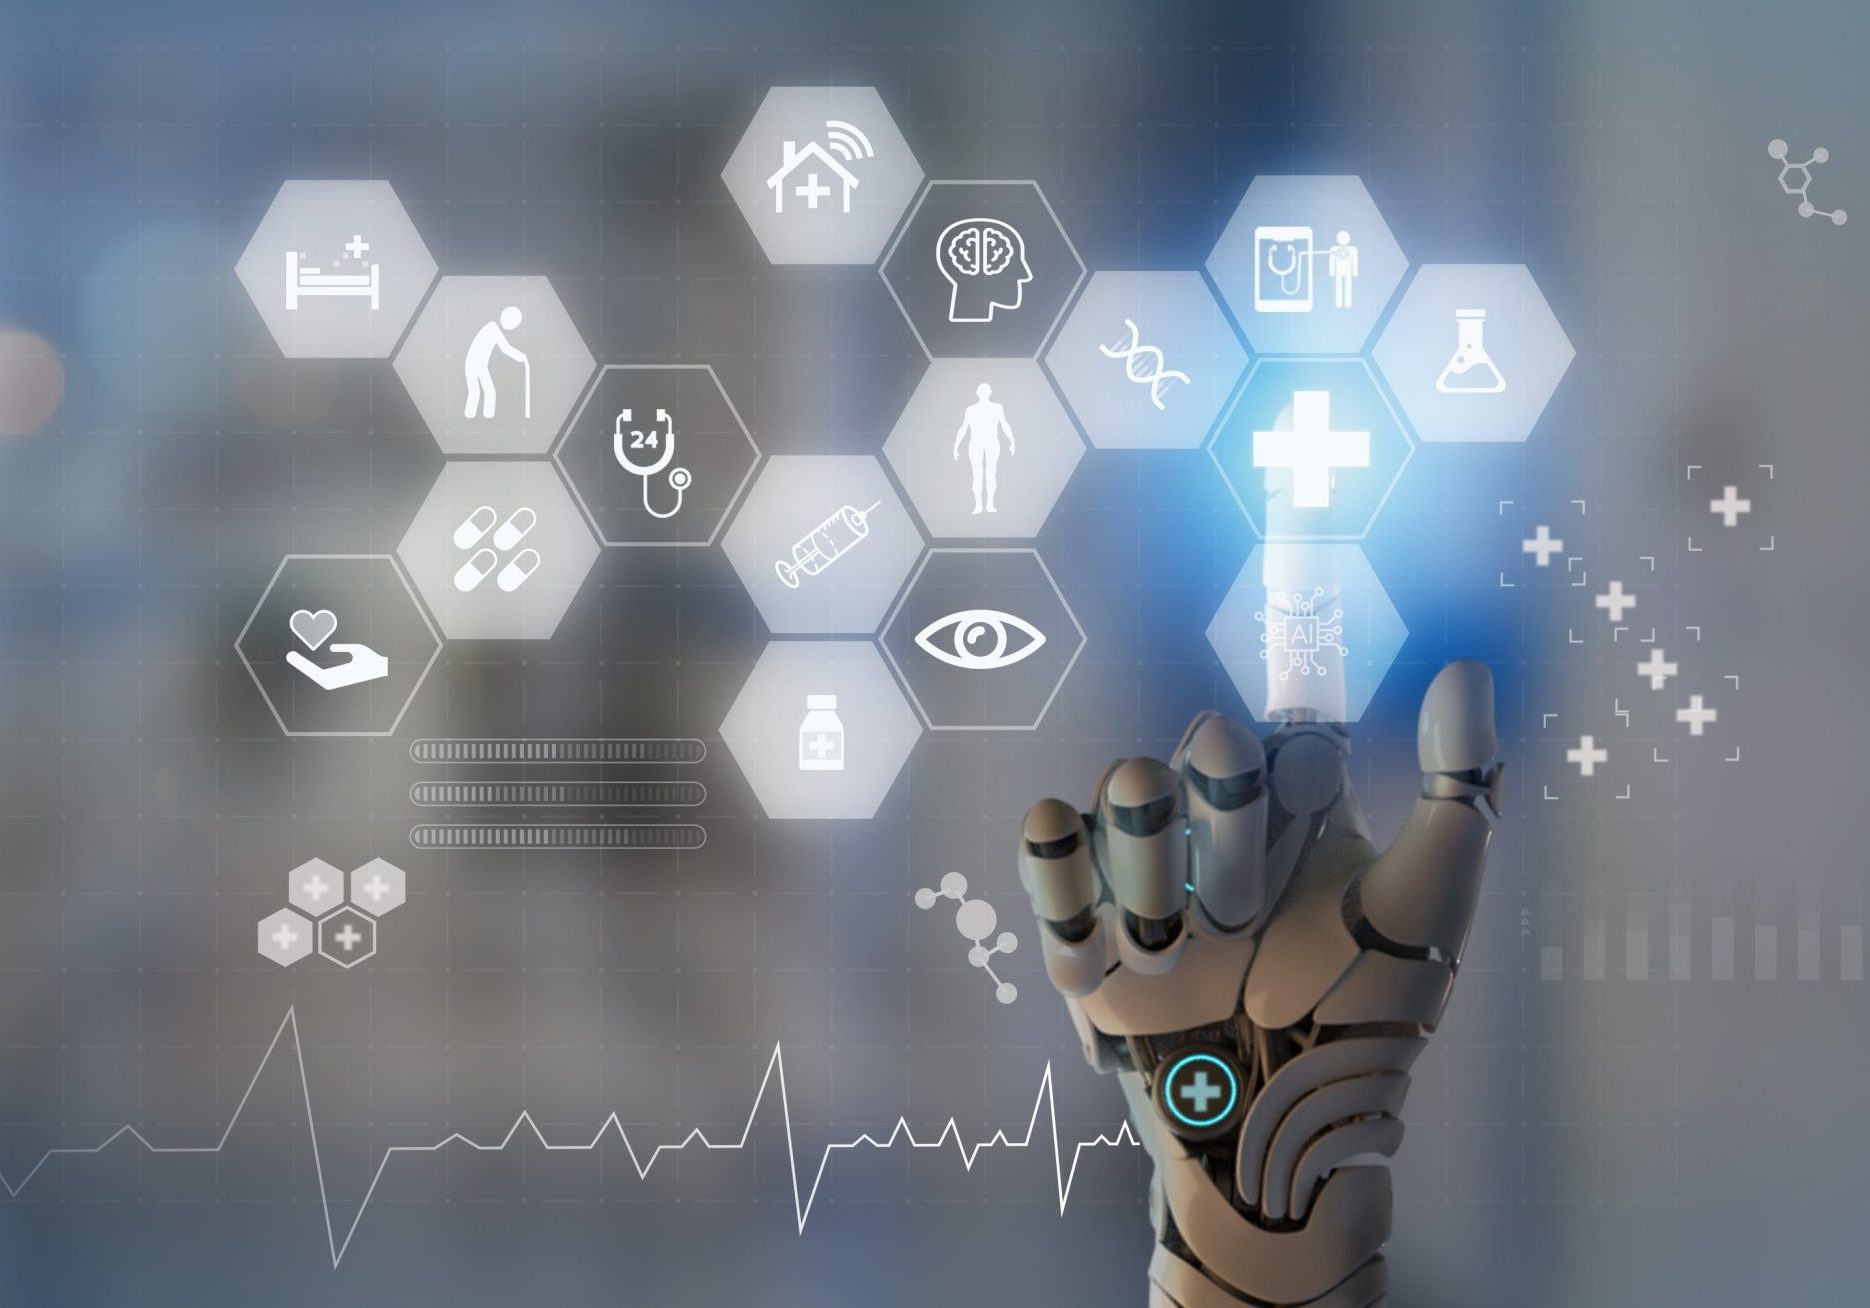 Digital healthcare and medical technology concept. Using AI artificial intelligence, telemedicine, mobile health applications, remote healthcare for personalized diagnoses and treatment in real time.